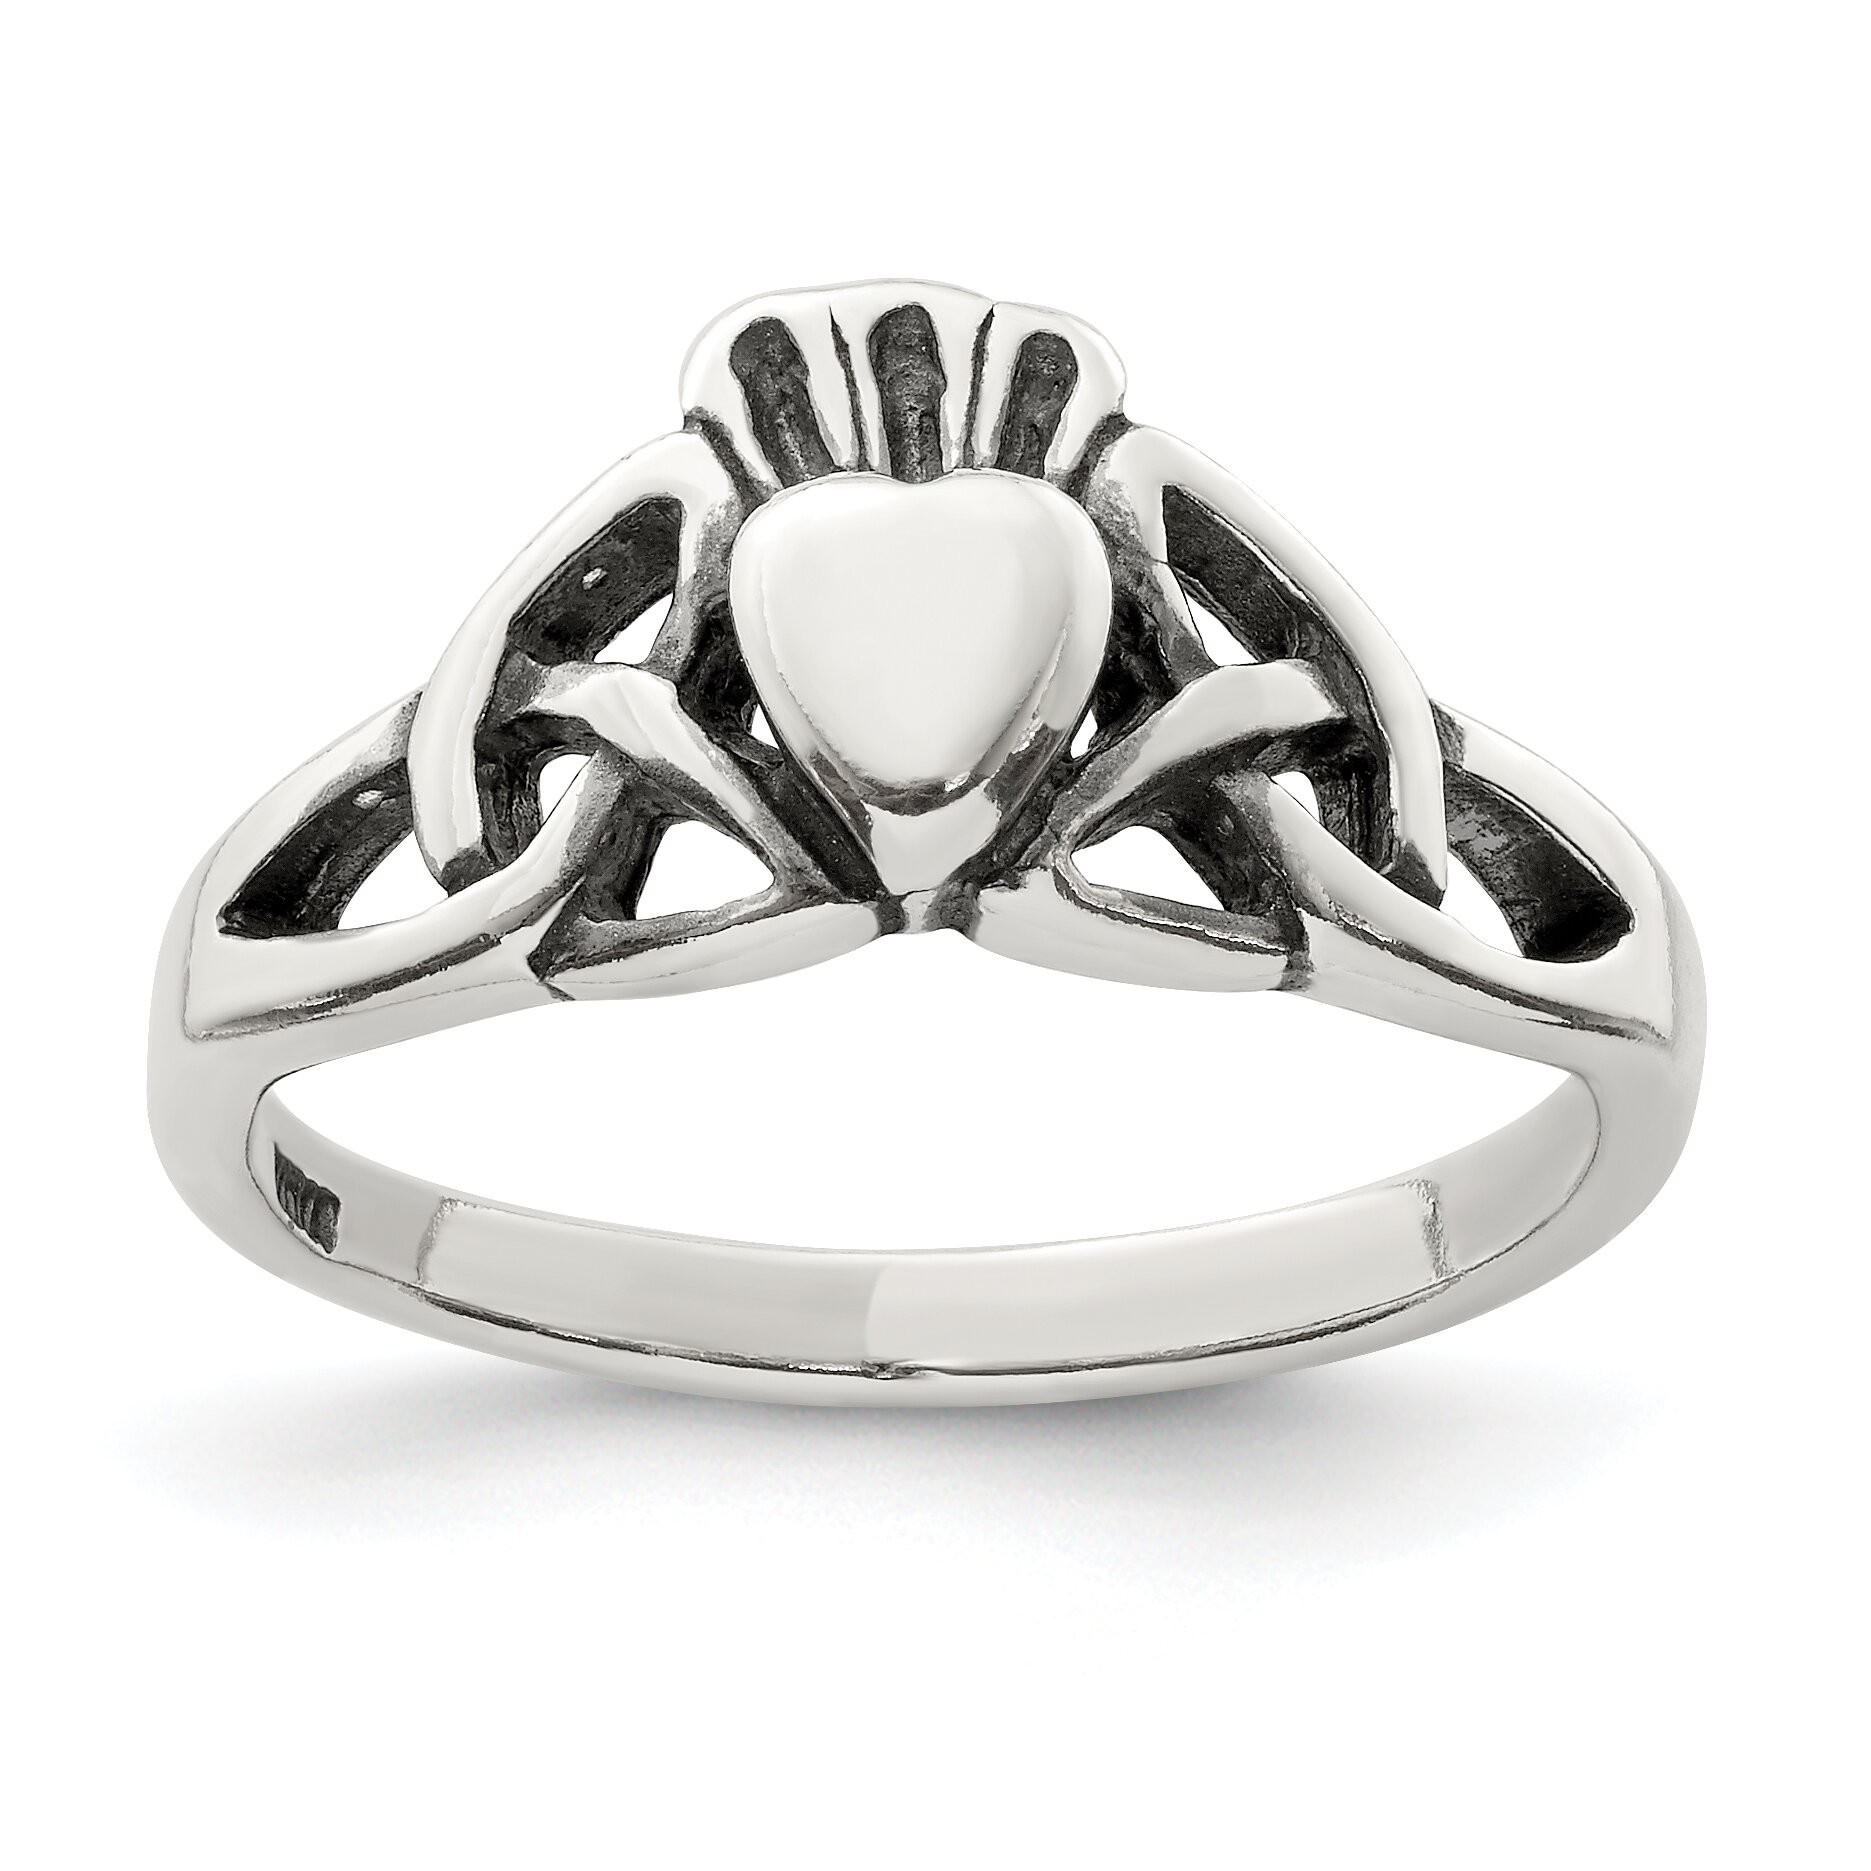 Findingking Sterling Silver Claddagh Ring Sz 6